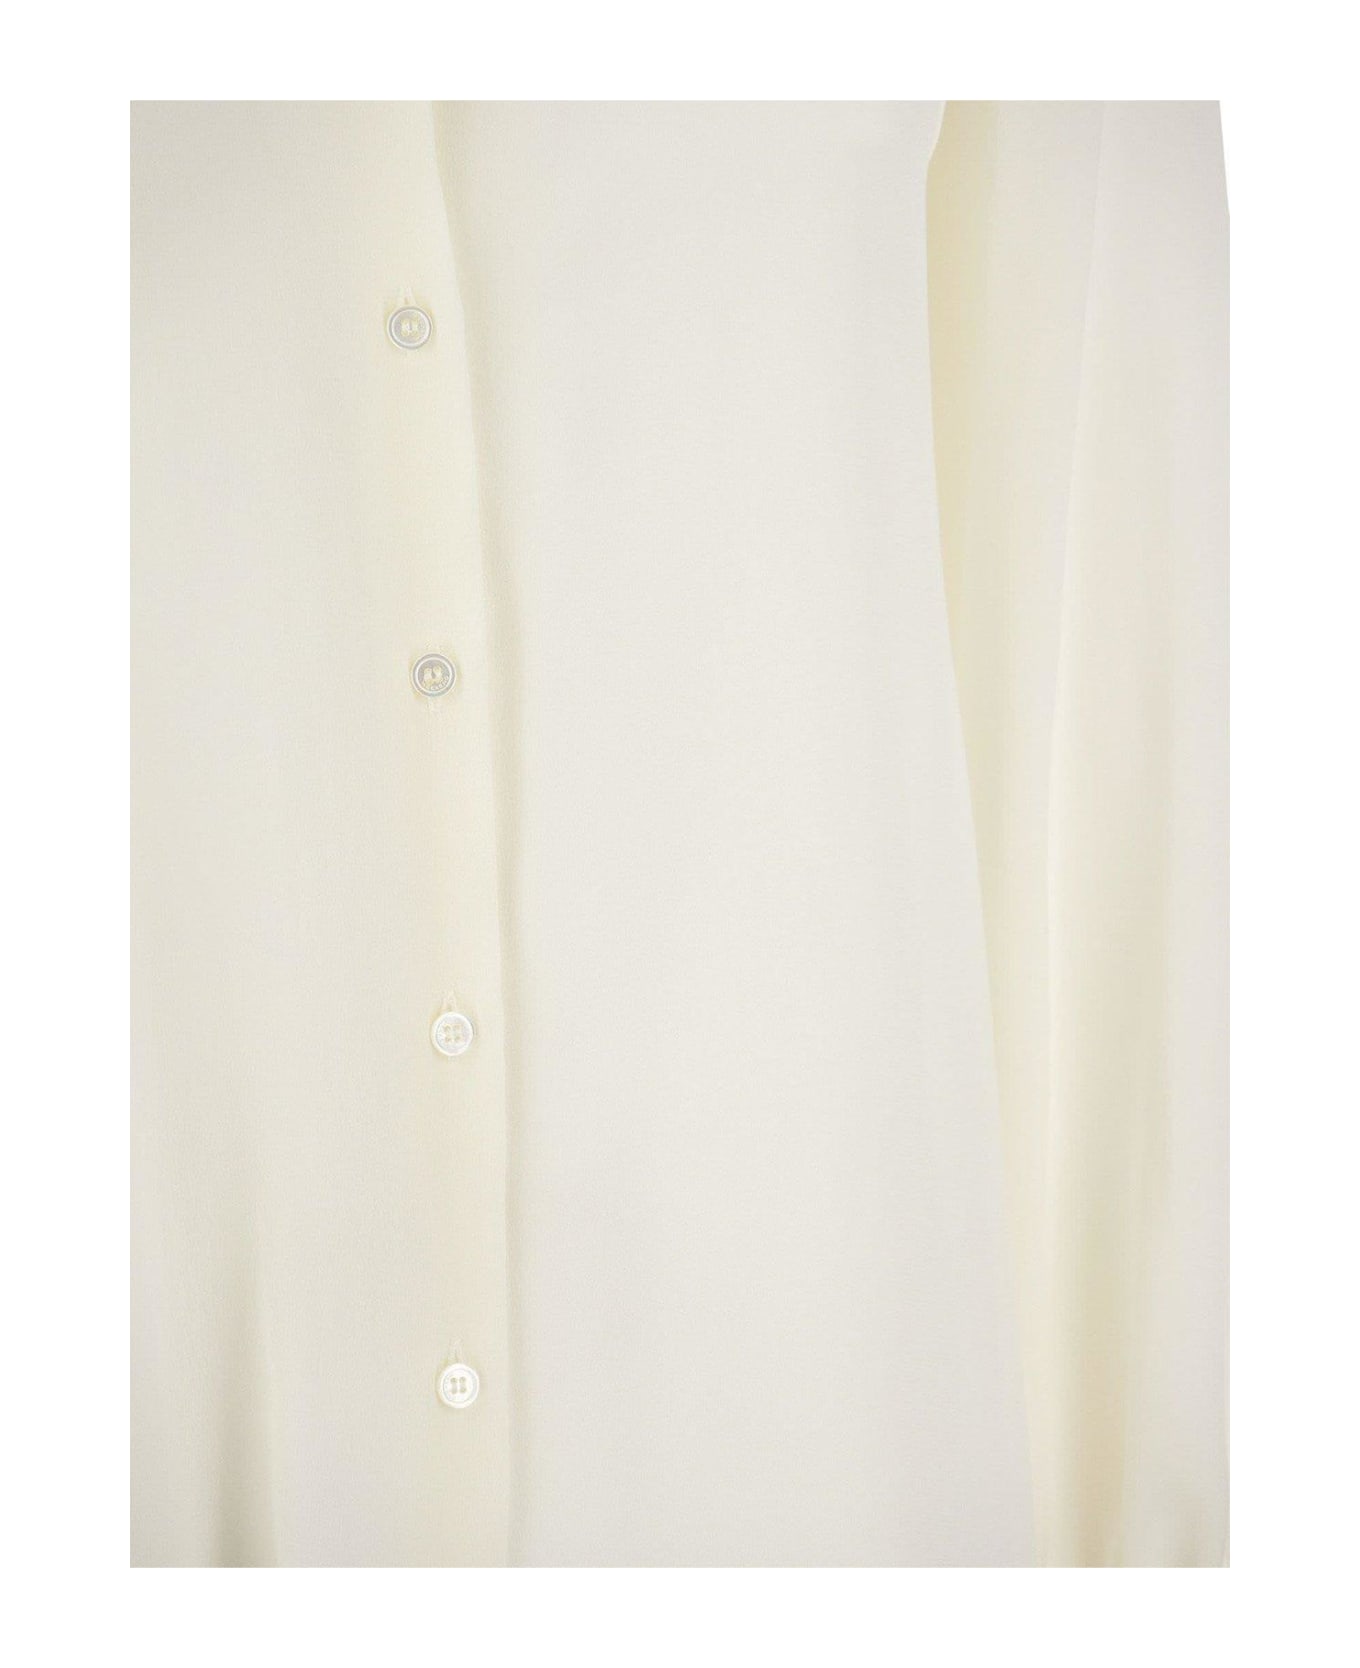 Weekend Max Mara Buttoned Long-sleeved Shirt - WHITE シャツ